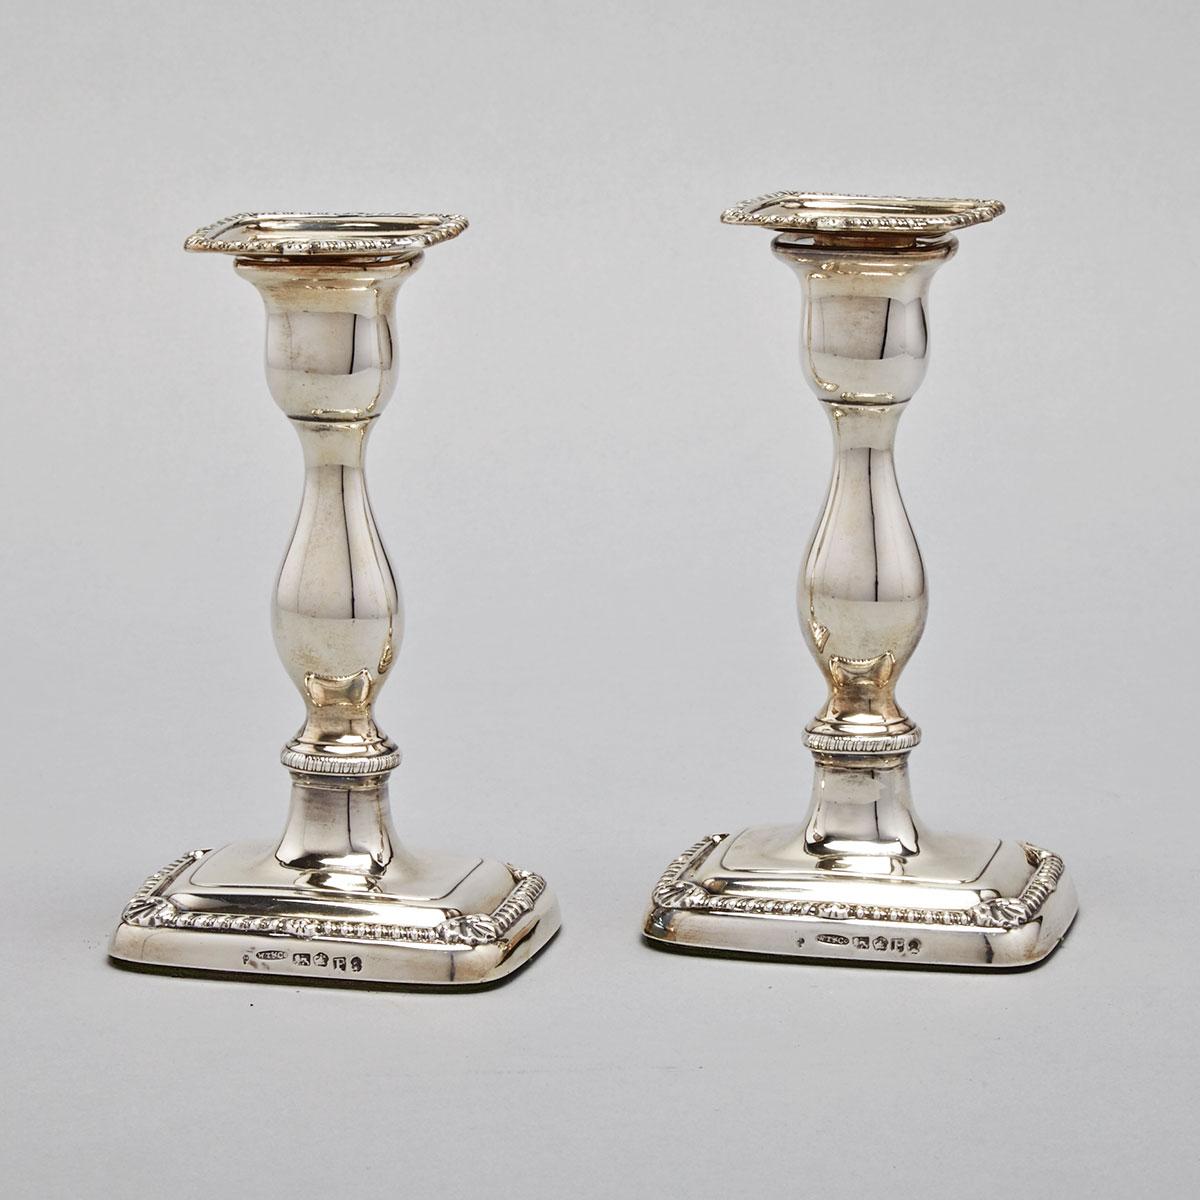 Pair of George III Silver Table Candlesticks, William Tucker & Co., Sheffield, 1808